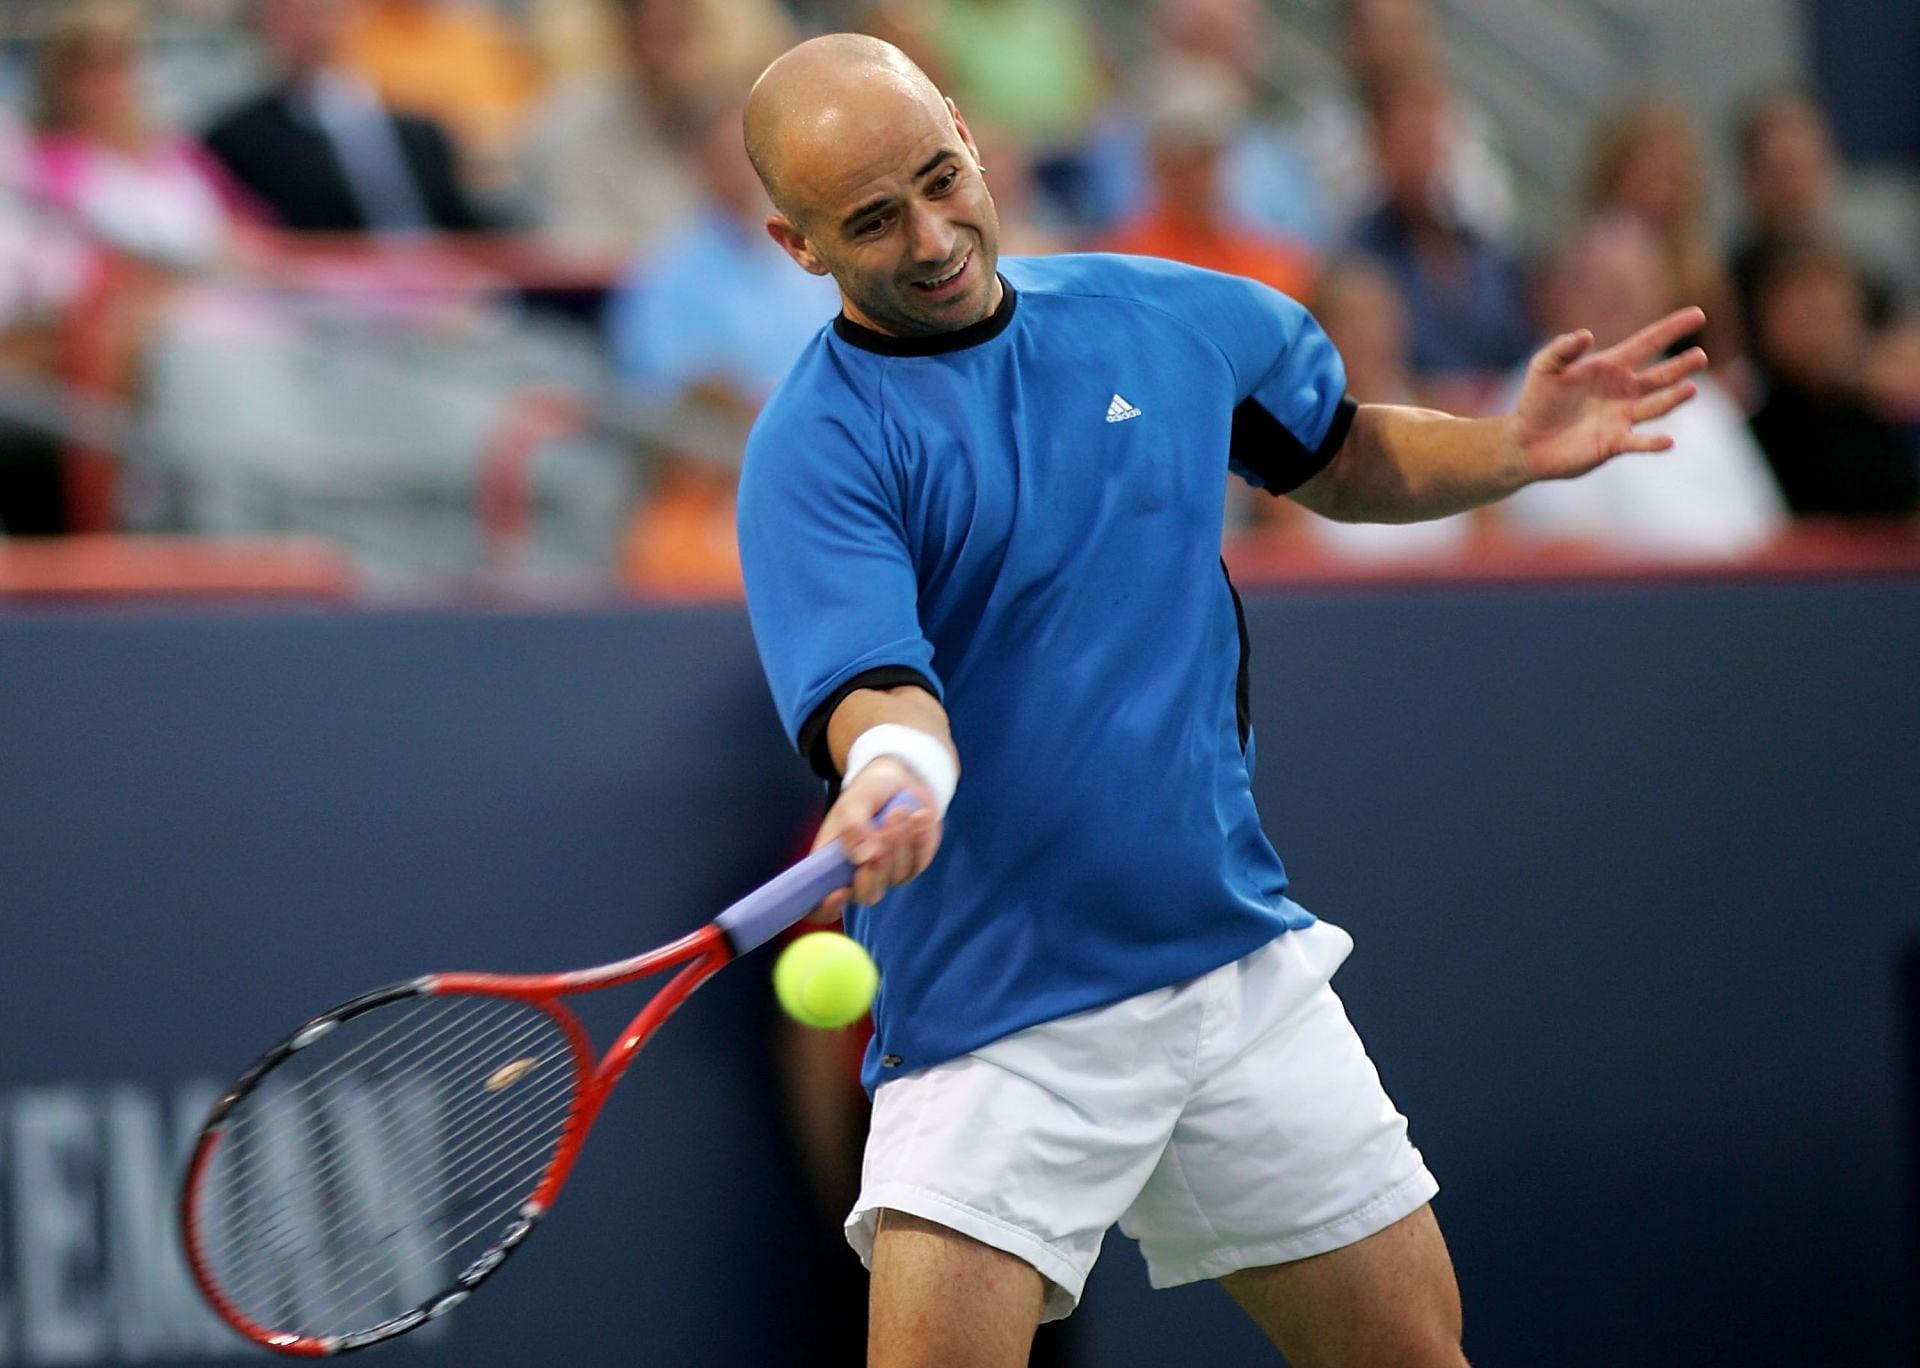 Andre Agassi hits a forhand